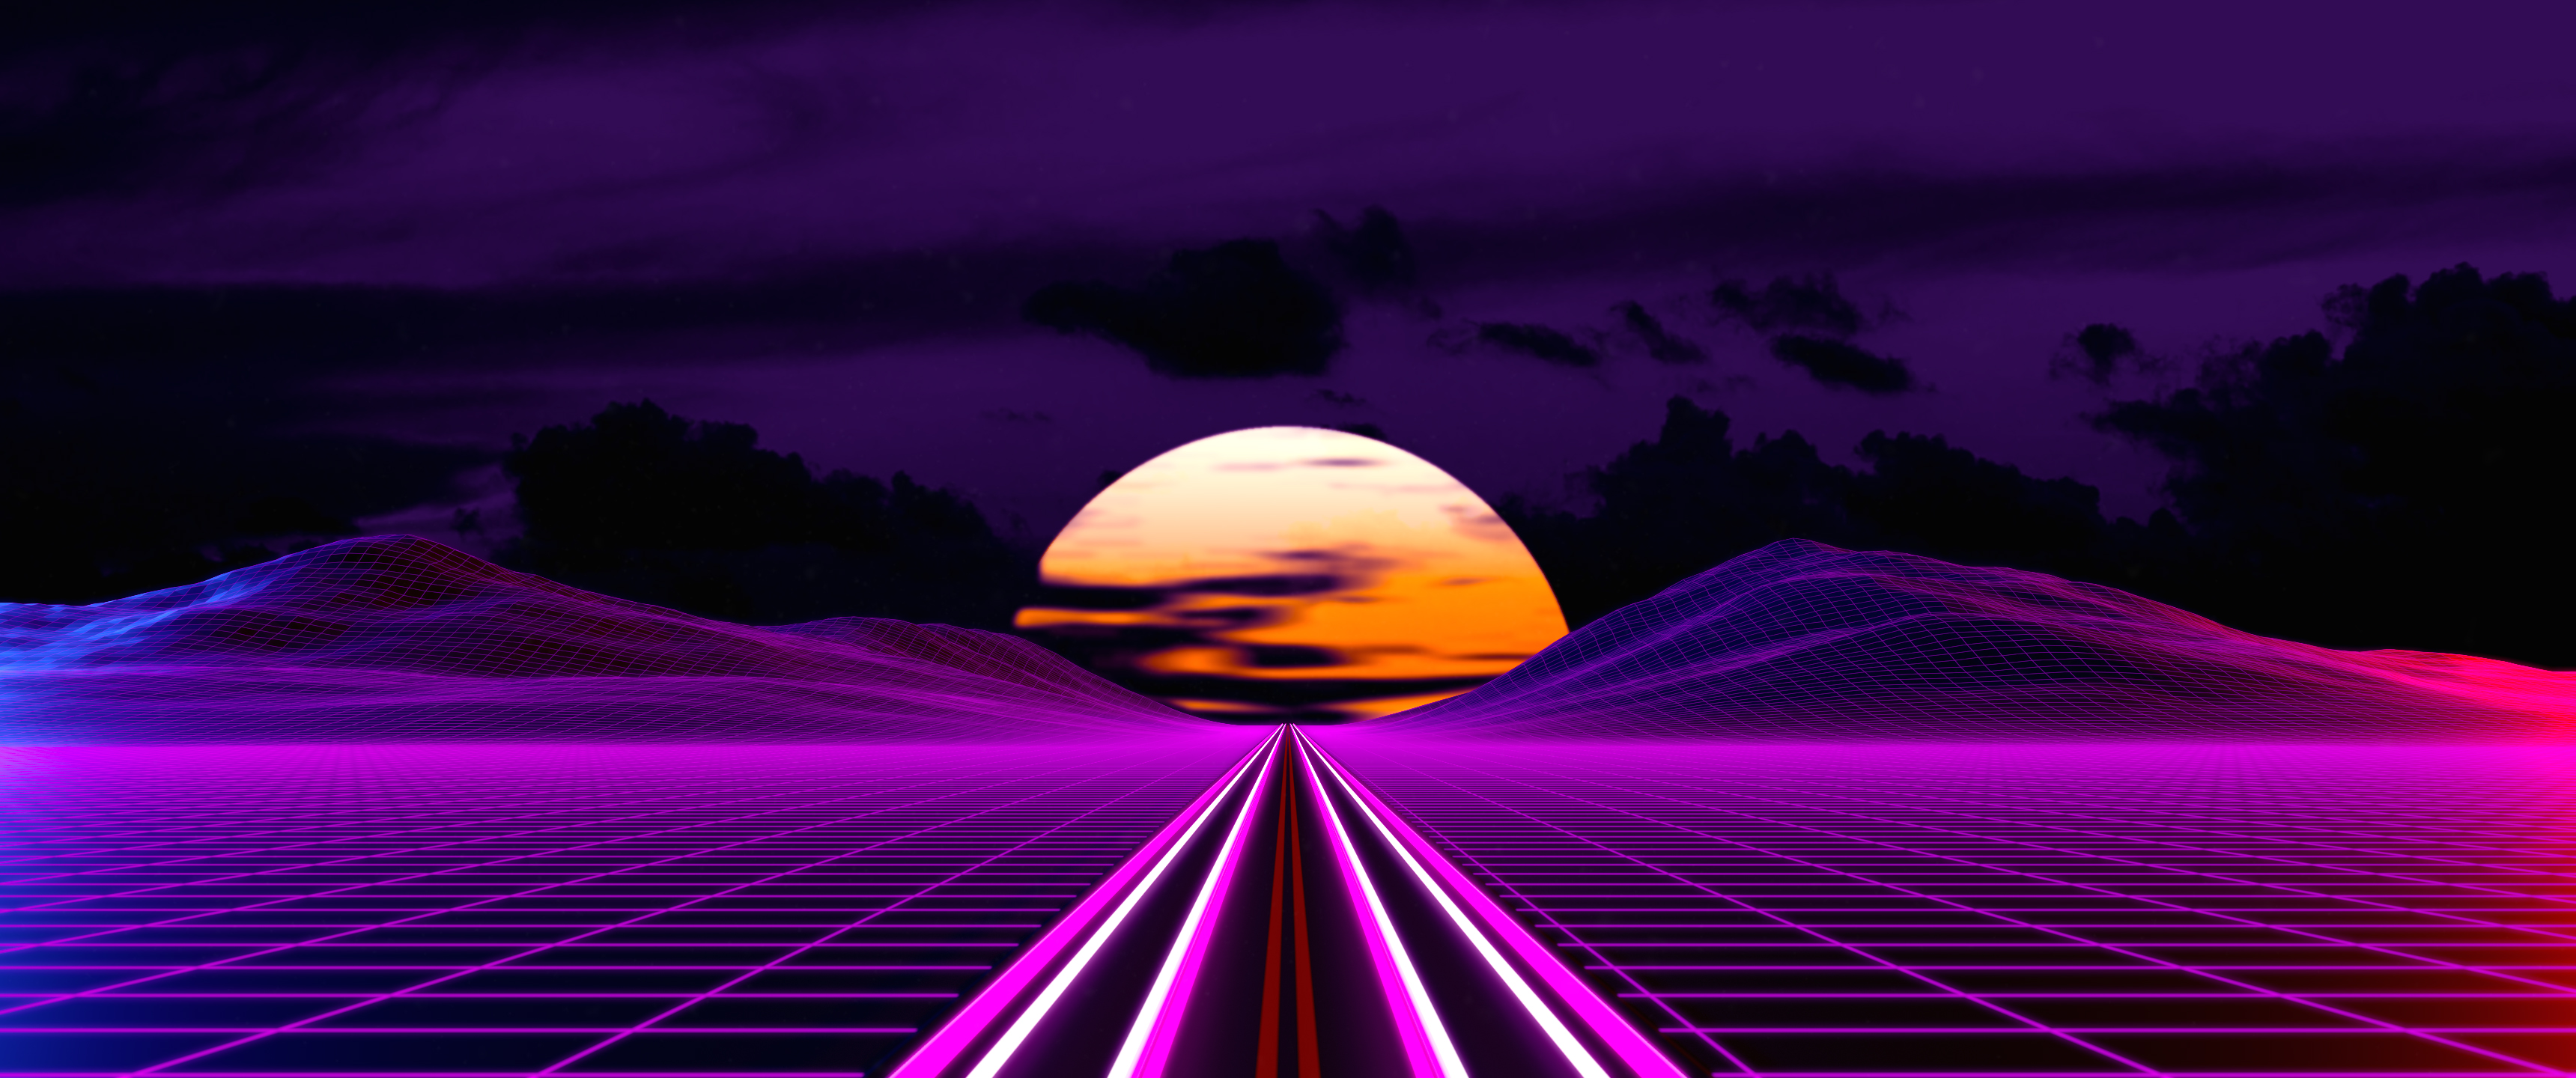 Retro Outrun Road 4k, HD Artist, 4k Wallpapers, Images, Backgrounds